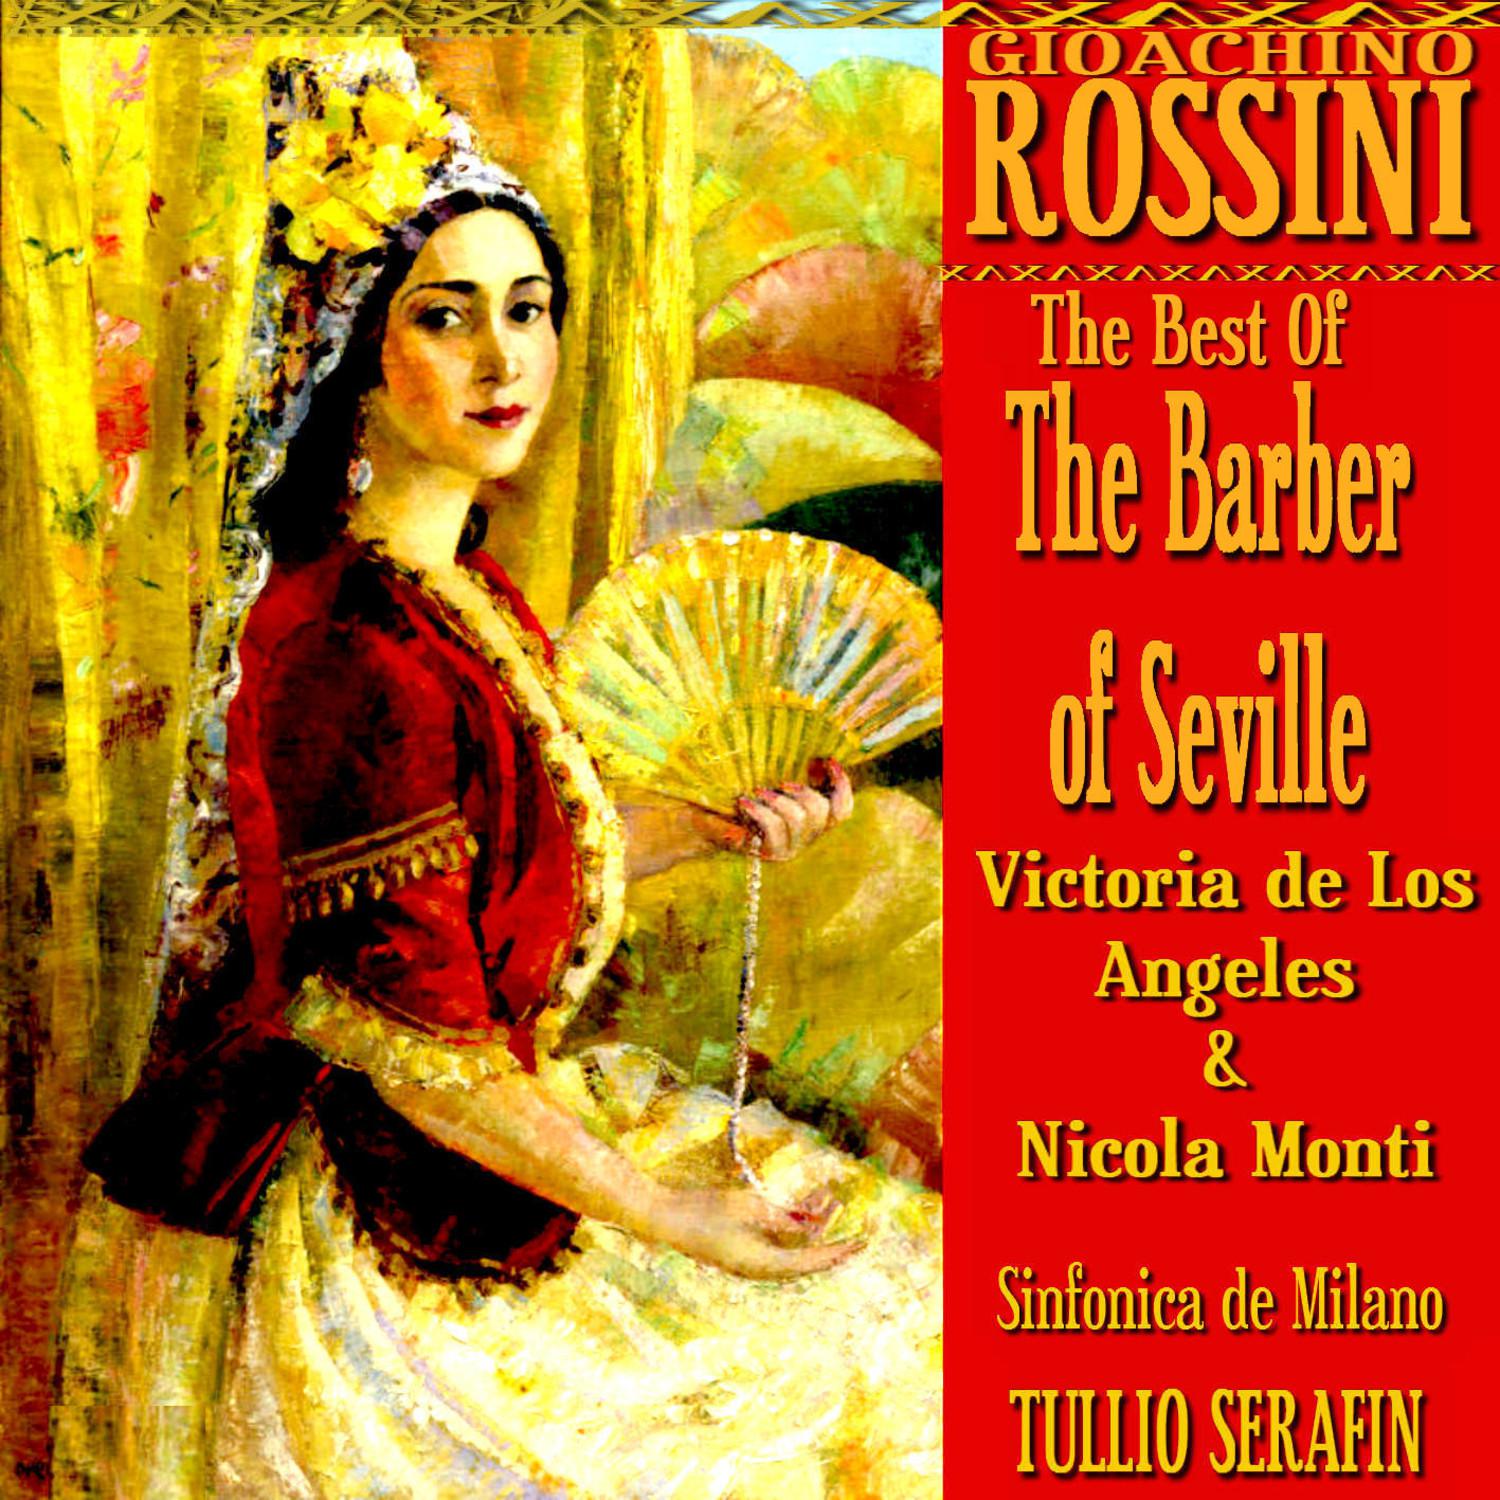 The Best of The Barber of Seville